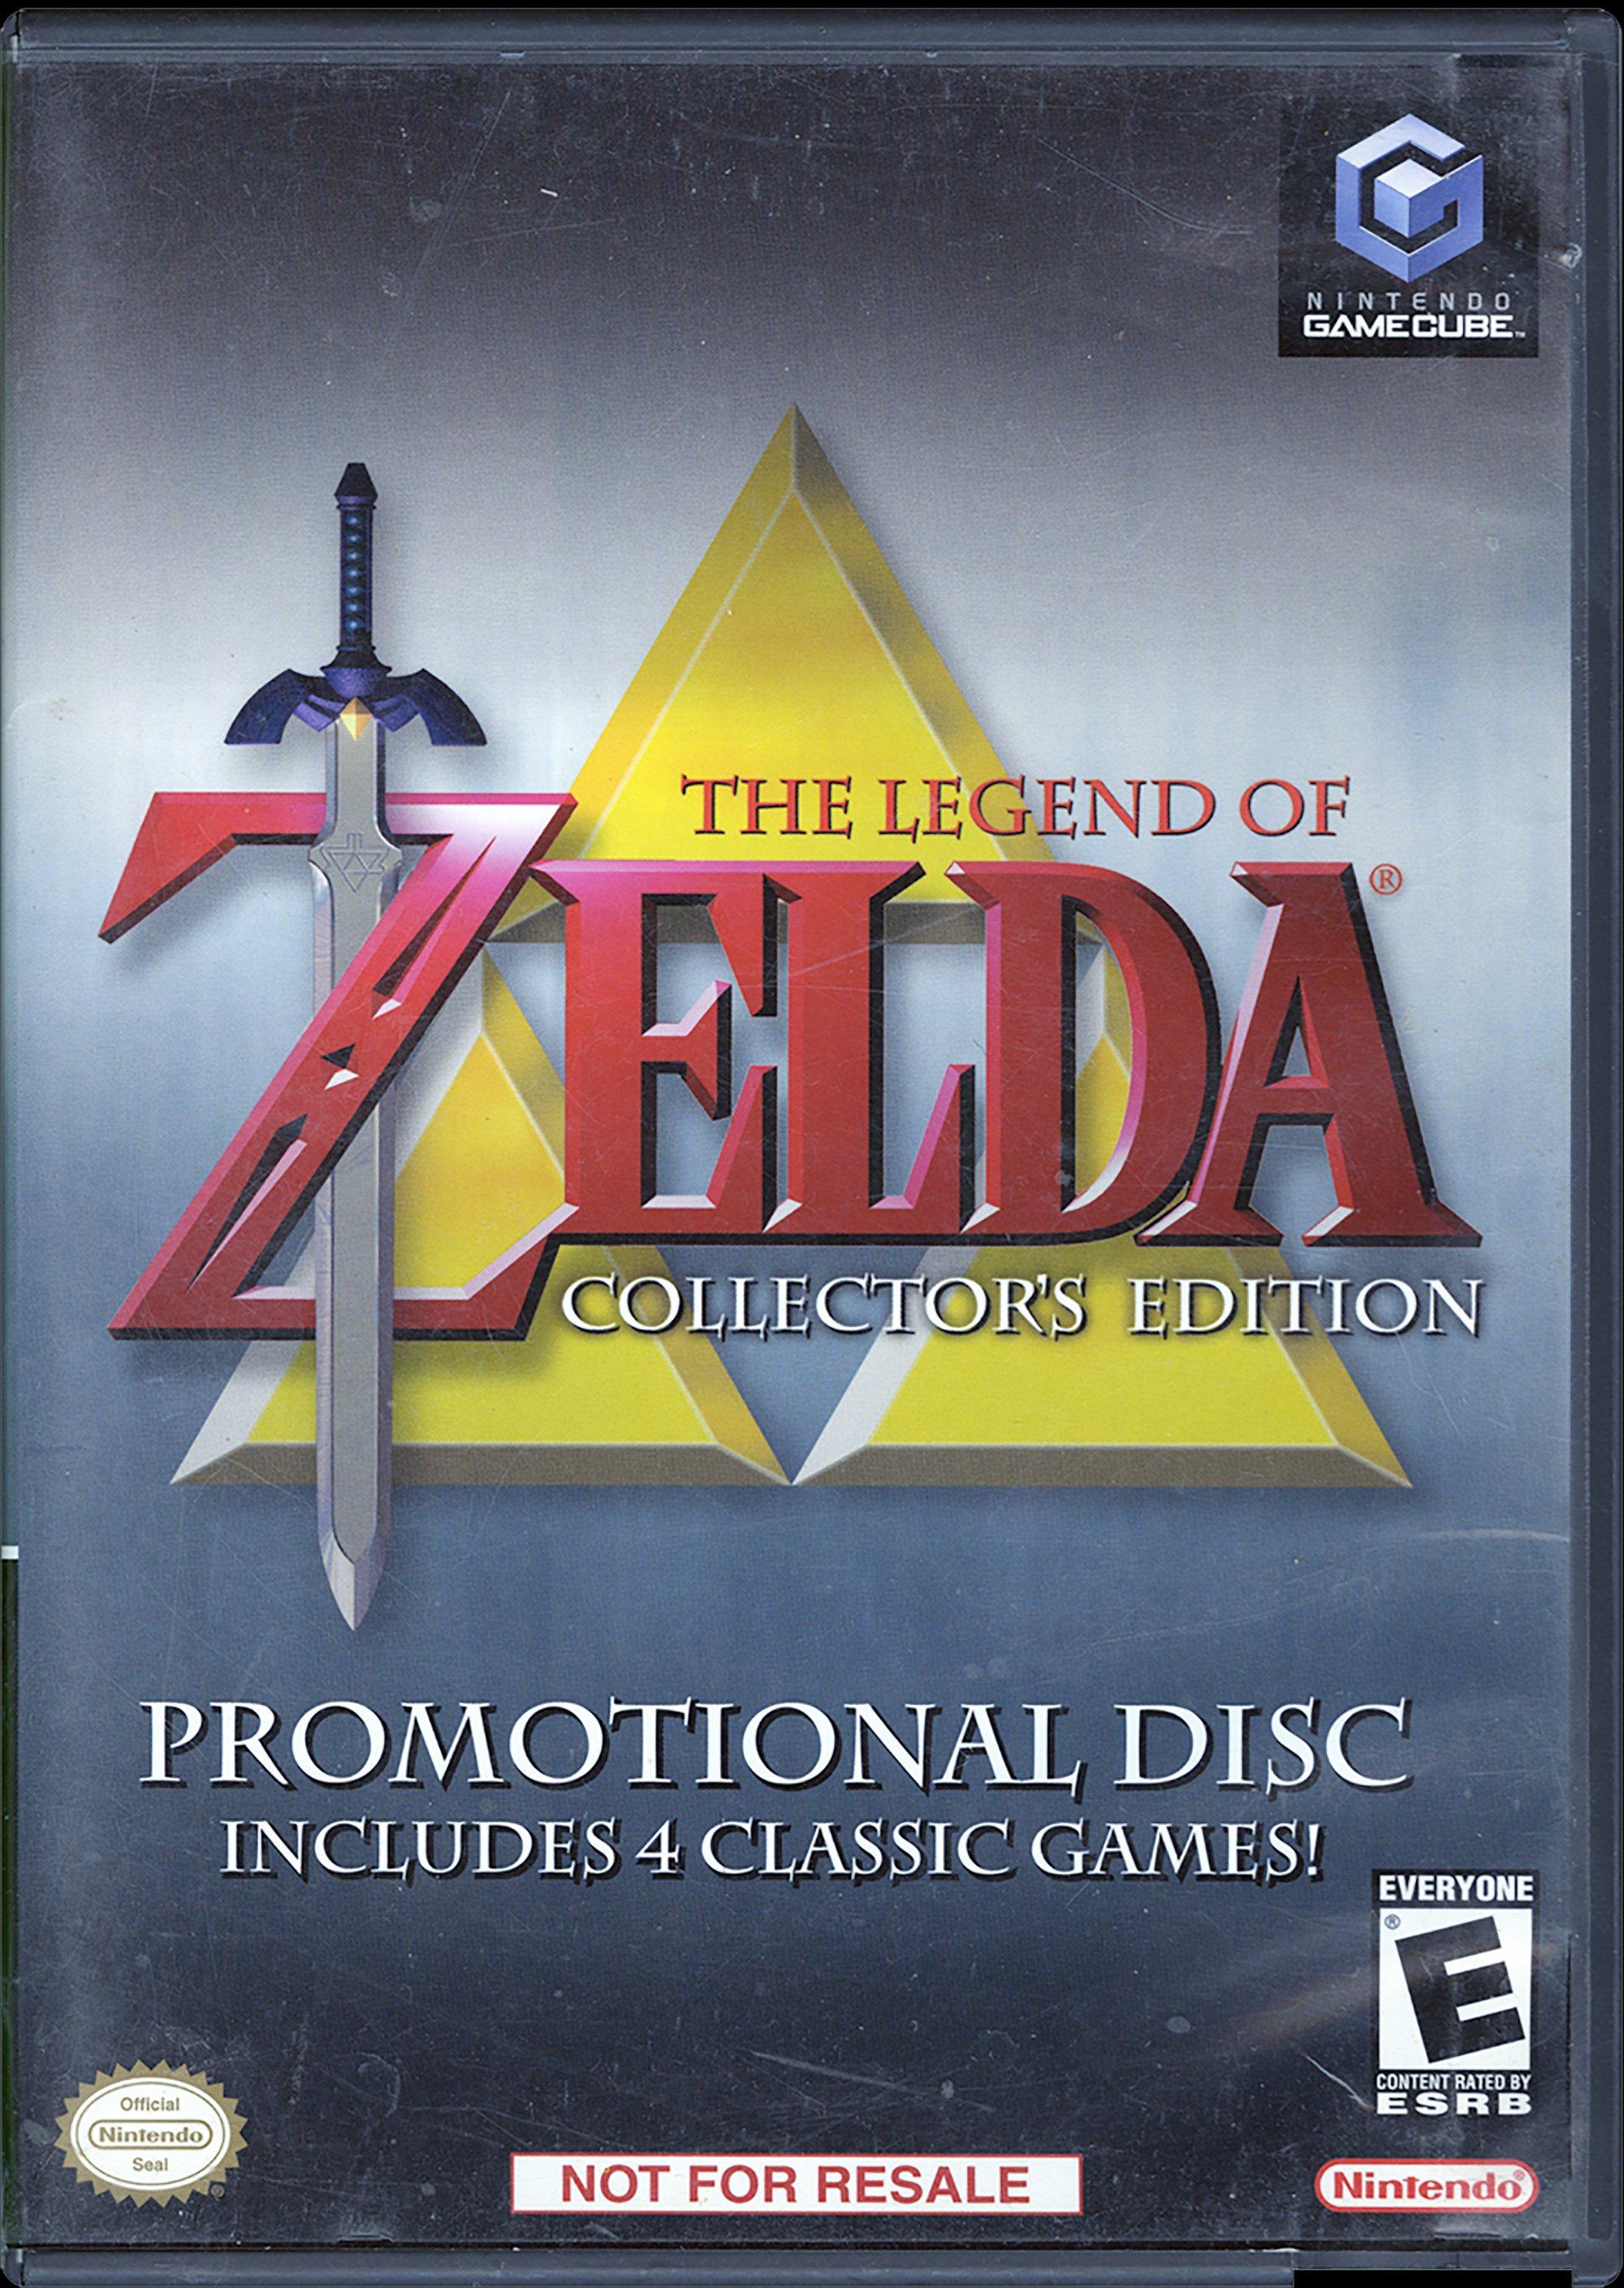 The Legend of Zelda: Collector's Edition - GameCube | Game Cube